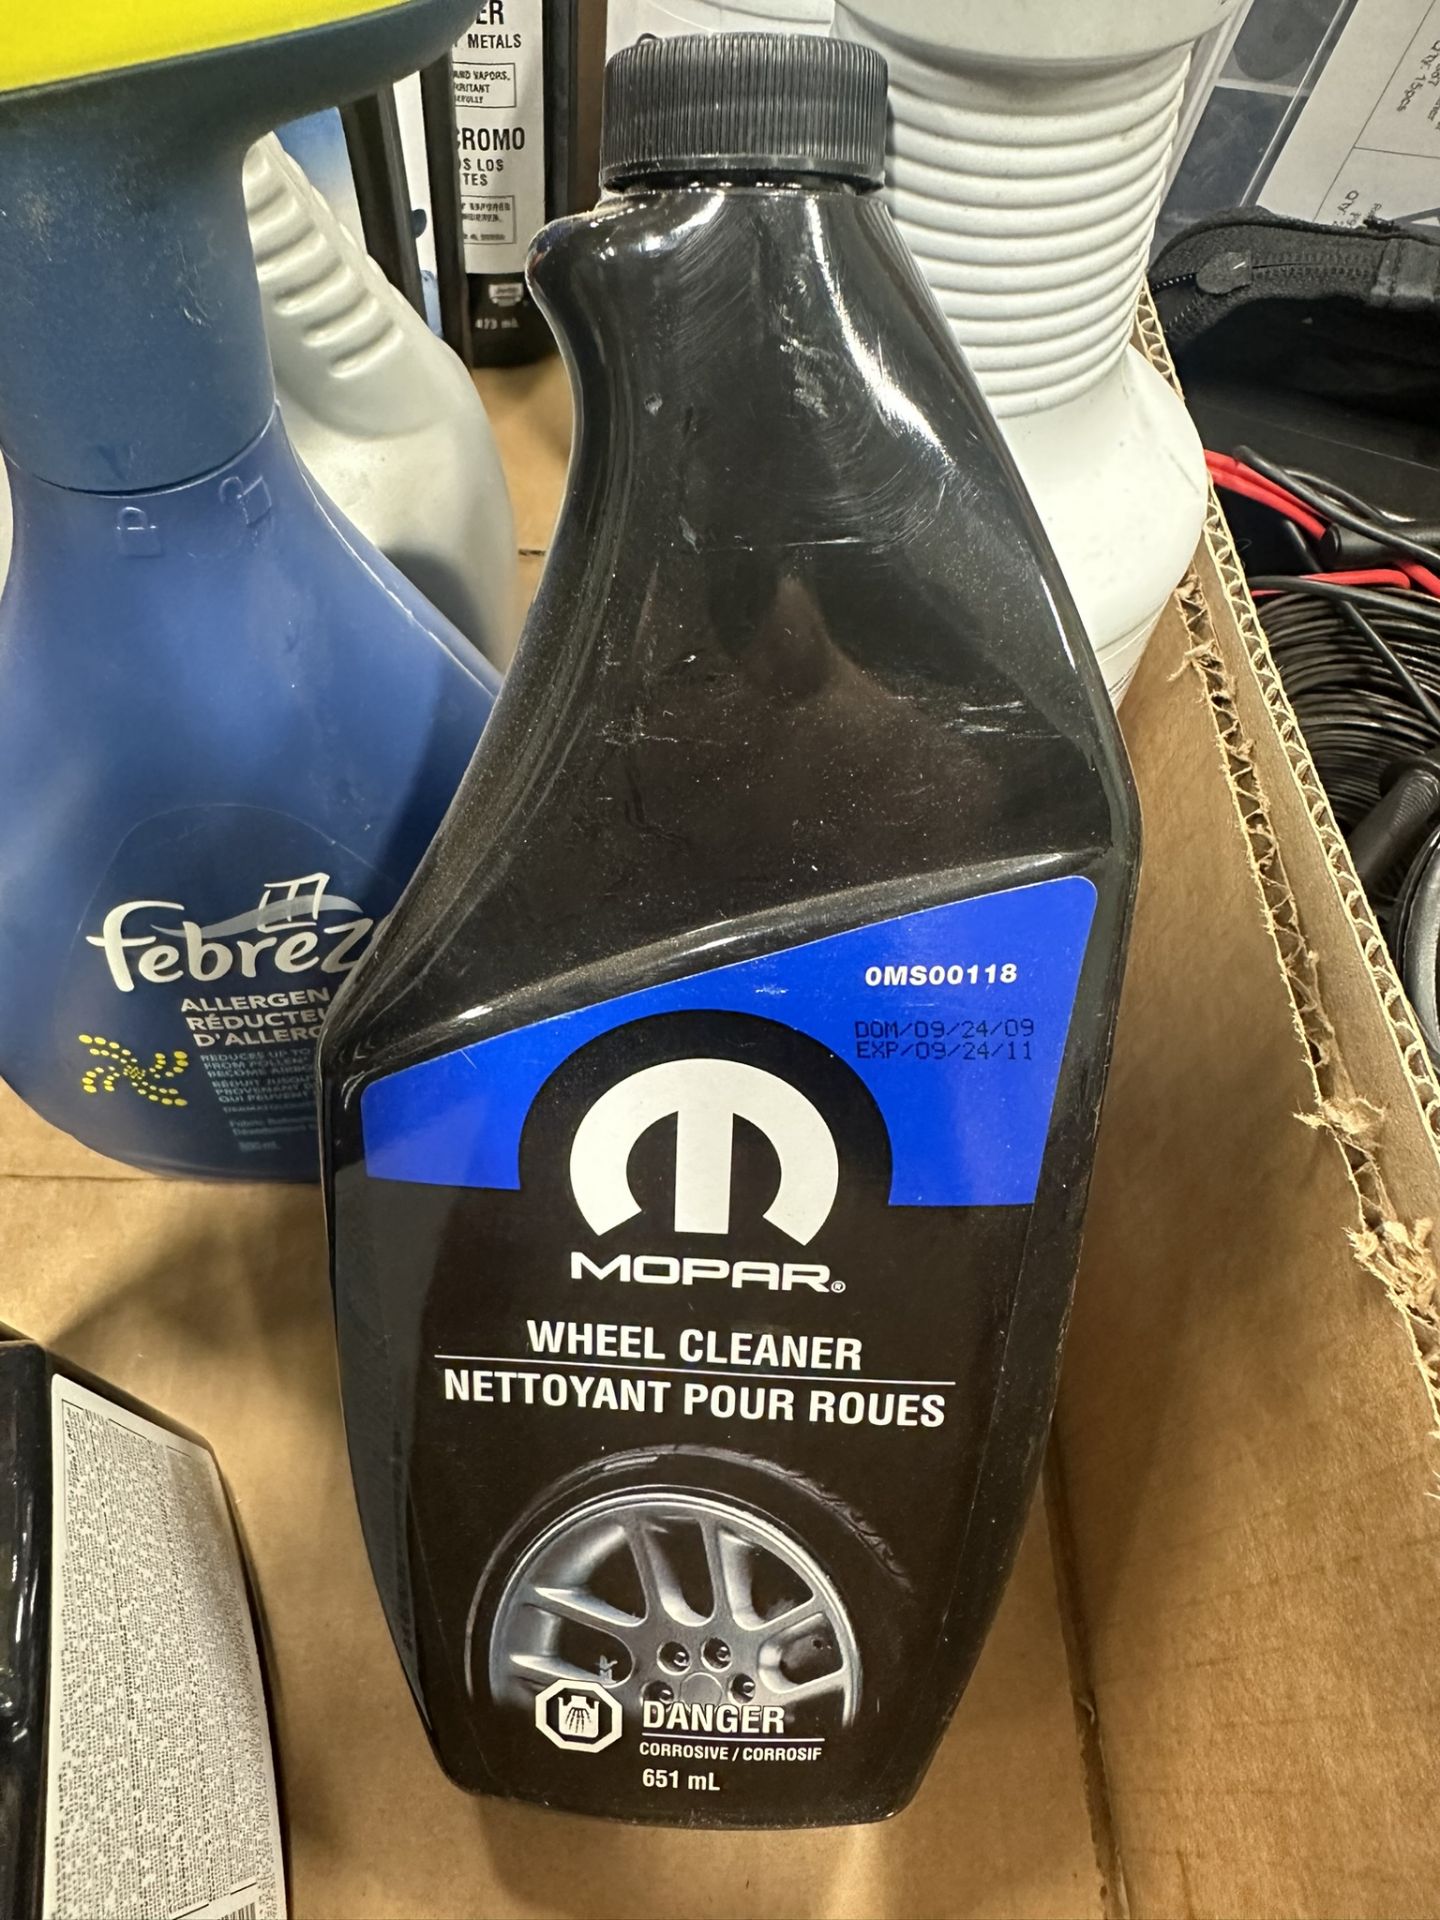 WHEEL CLEANER, TIRE DRESSING, WHITEWALL CLEANER, ETC. - Image 6 of 6